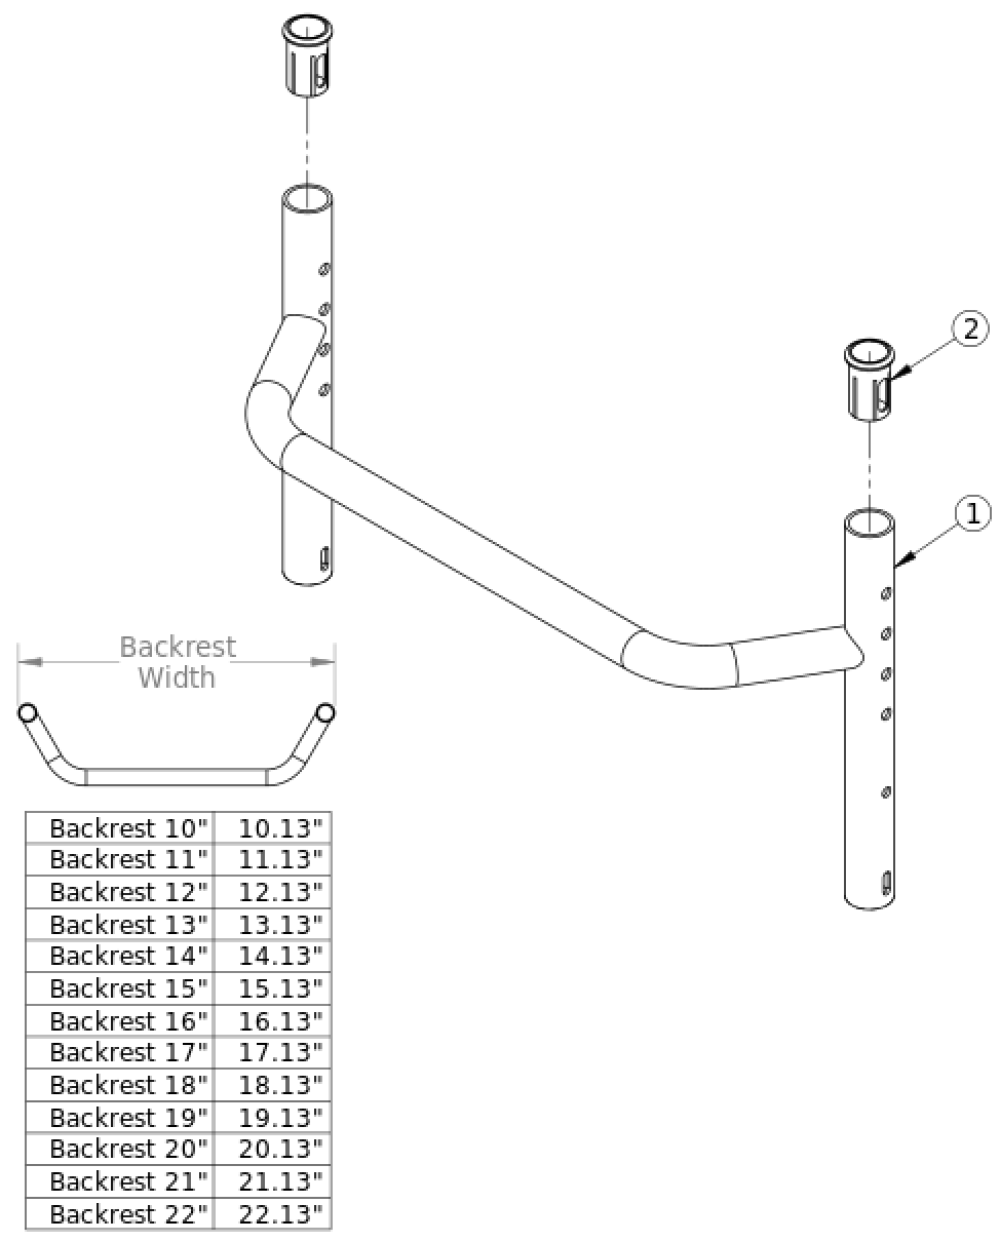 (discontinued) Rogue Adjustable Height Backrest Frame With Non-adjustable Rigidizer Bar parts diagram